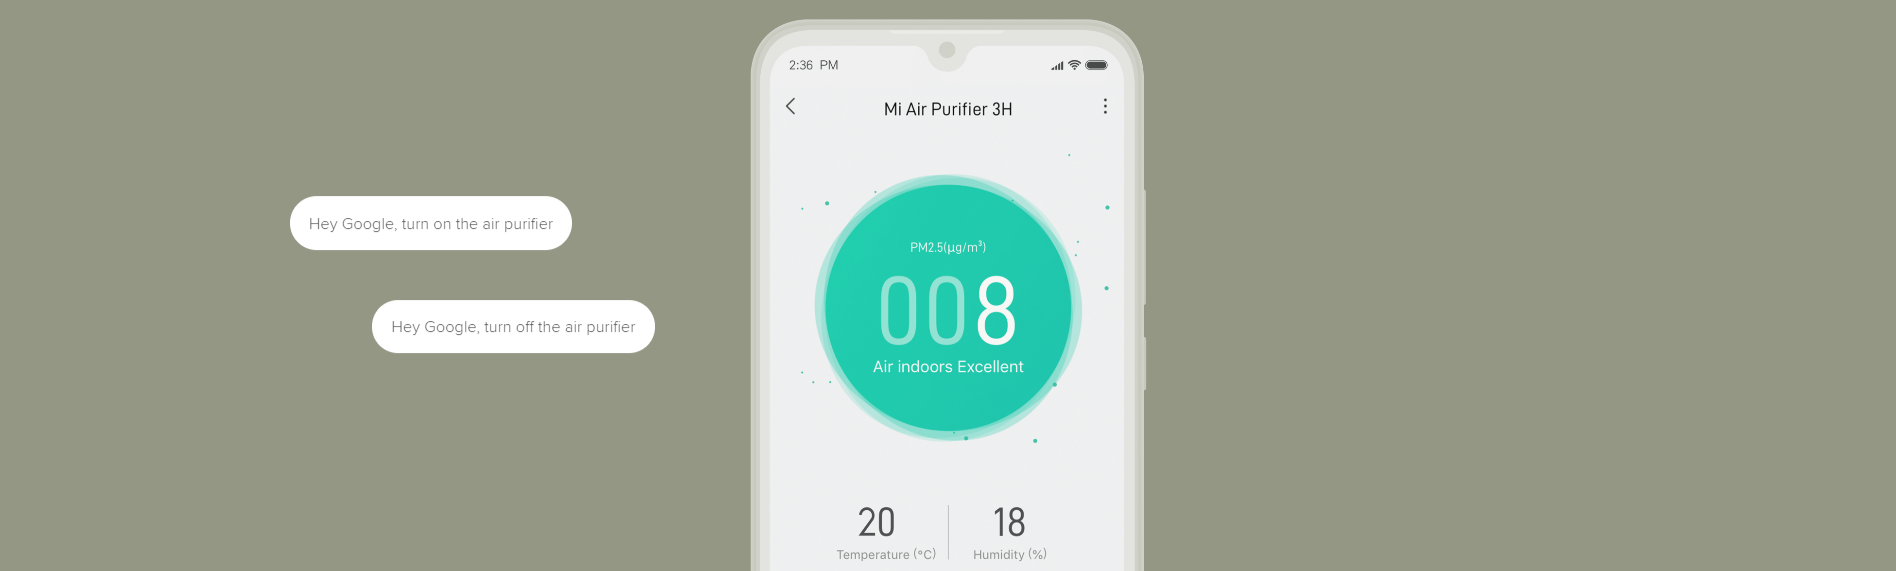 Mi Air Purifier 3H, 3-Layer Integrated 360° cylindrical HEPA filter Removes  99.97% of Pollutants, Delivers 6330 liters of purified air per minute, APP